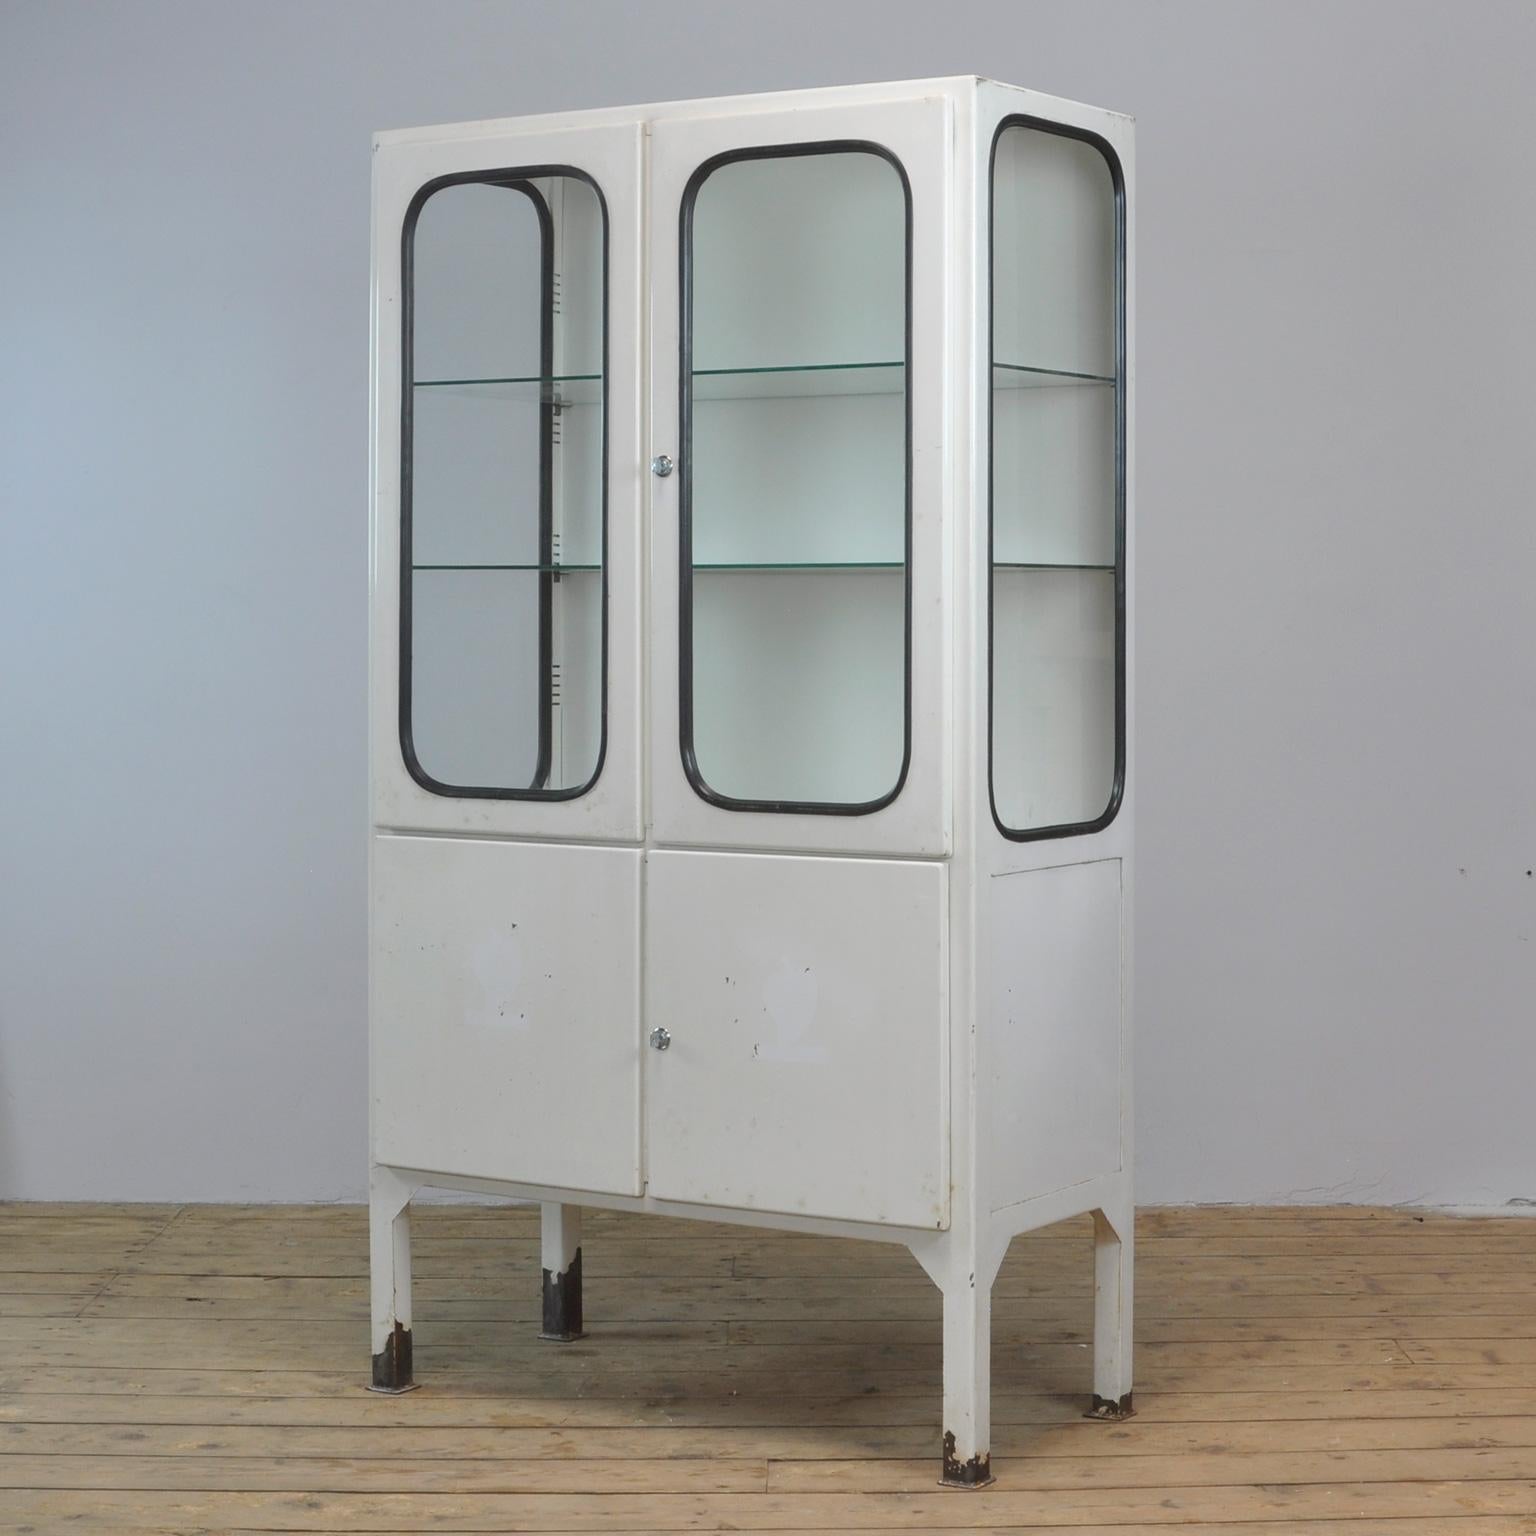 This medical cabinet was designed in the 1970s and was produced circa 1975 in Hungary. It is made from iron and glass, and the glass is held by a black rubber strip. The cabinet features two adjustable glass shelves and functioning locks. The